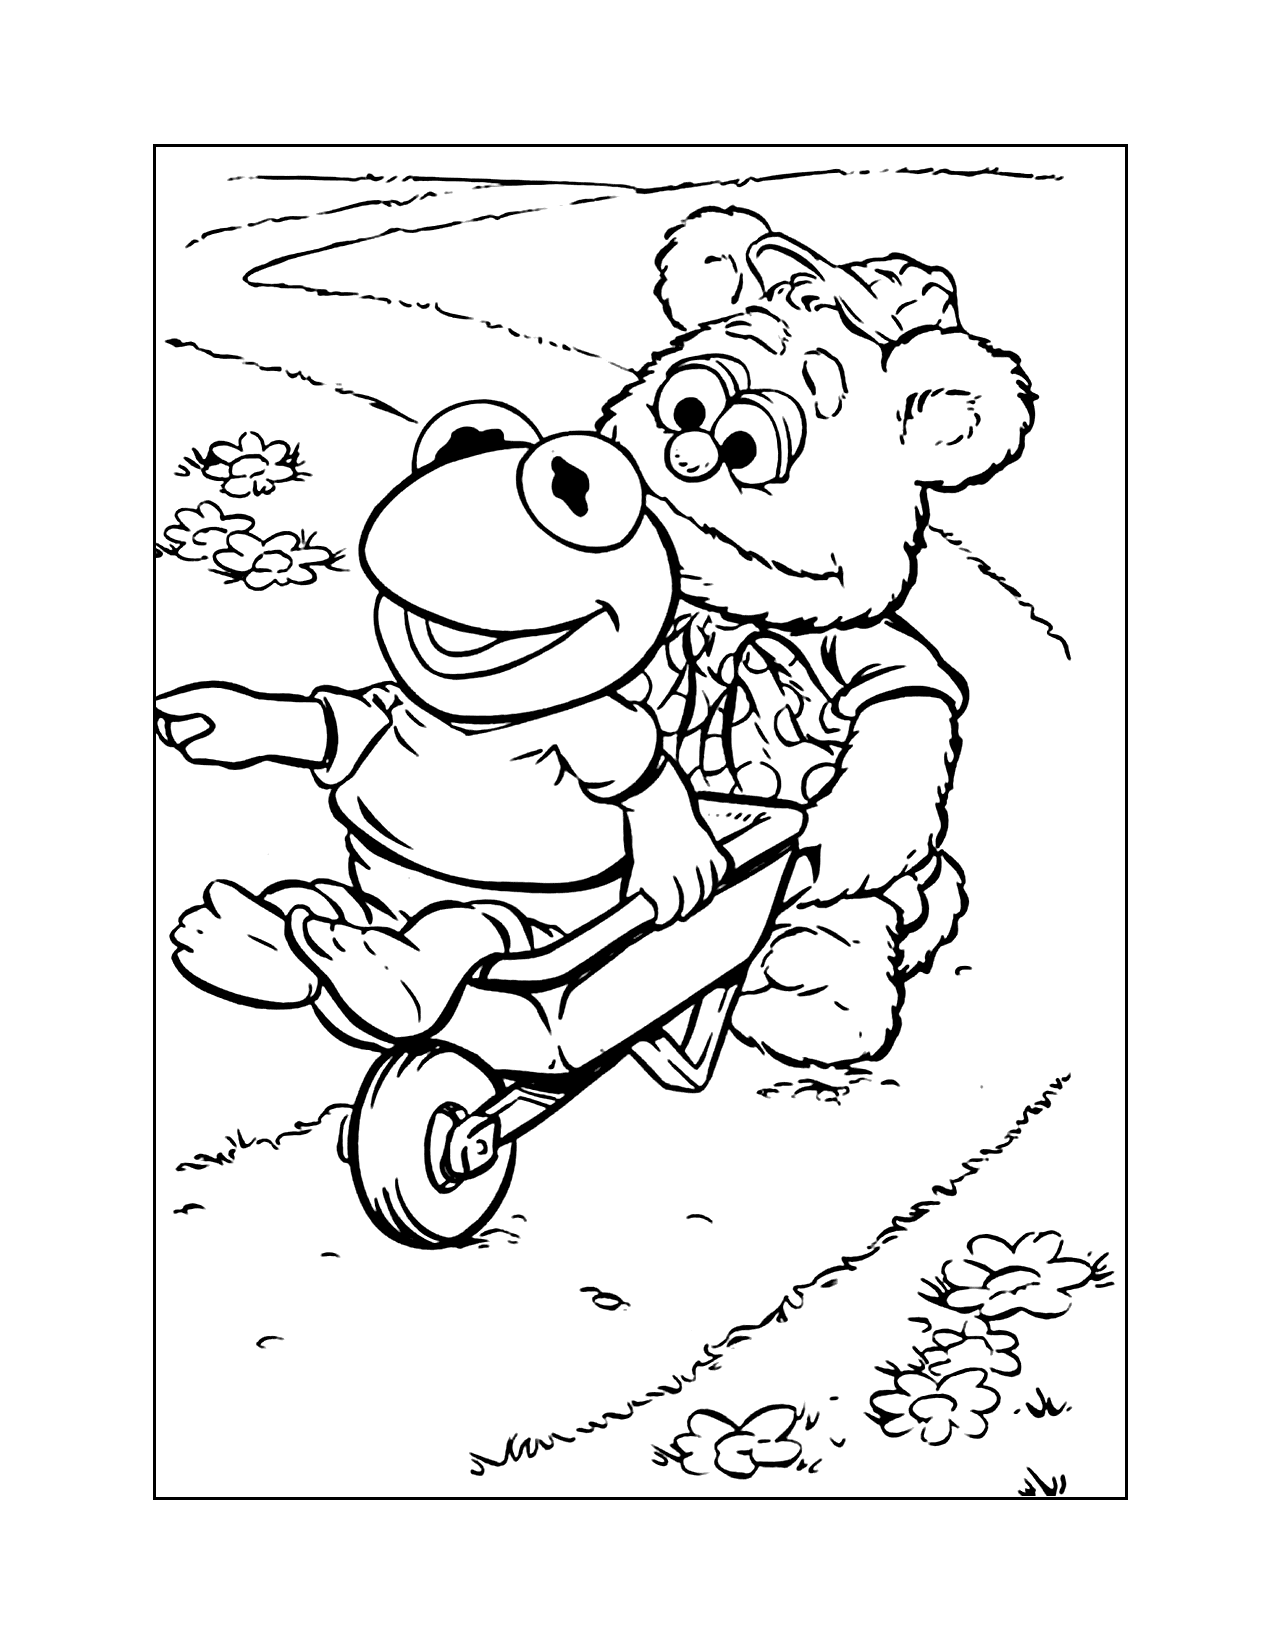 Baby Fozzi Pushing Kermit In A Wheelbarrel Coloring Page